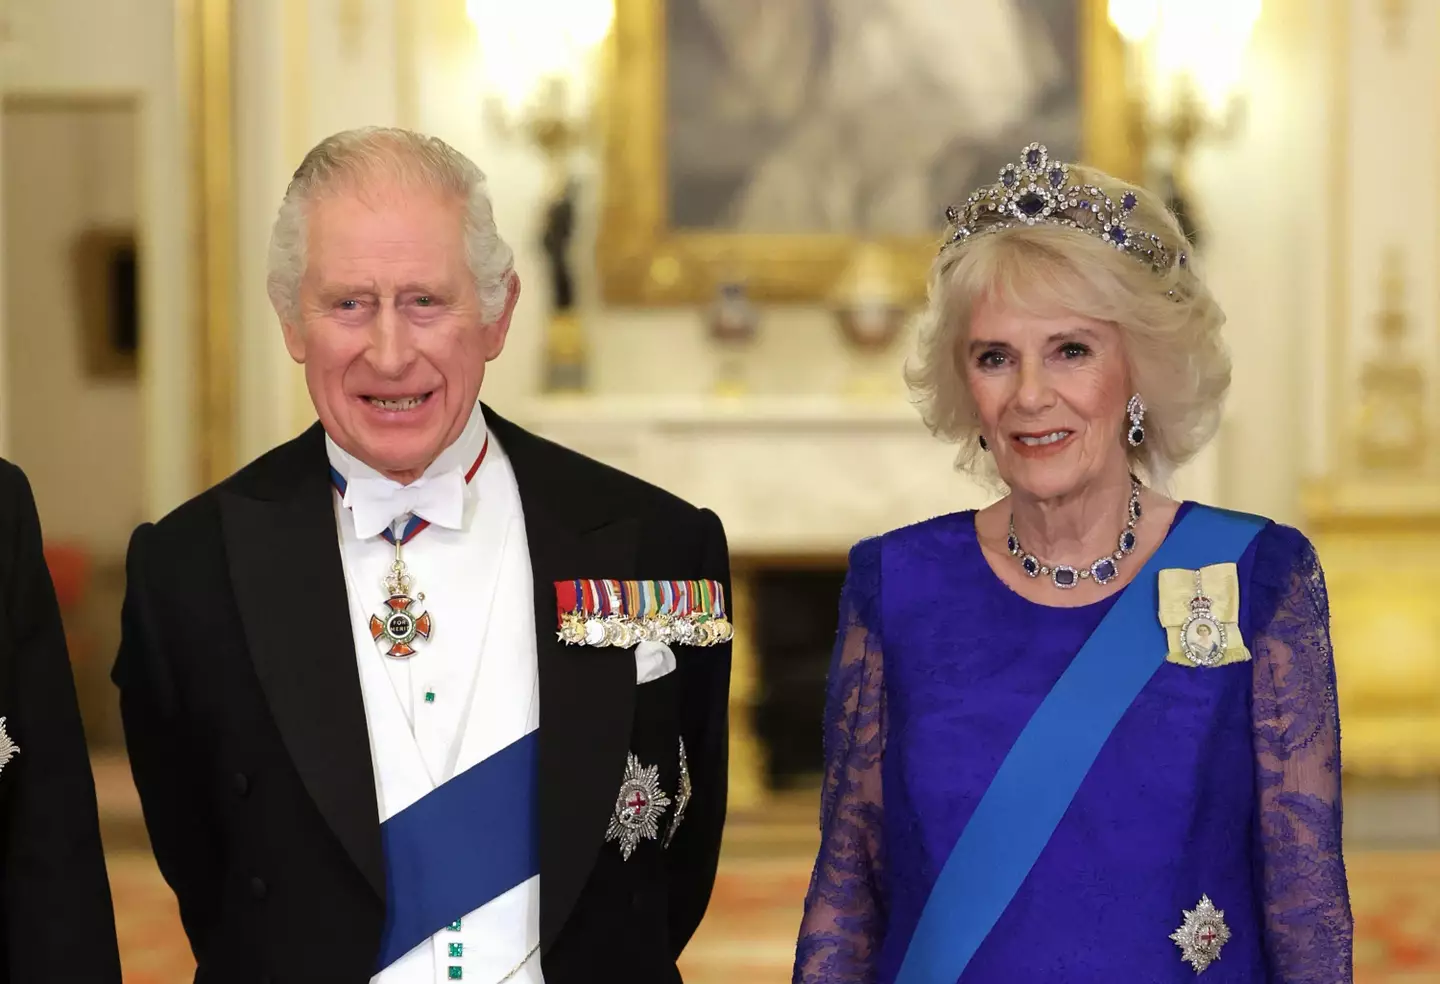 King Charles and Queen Consort Camilla will be crowned today (6 May).